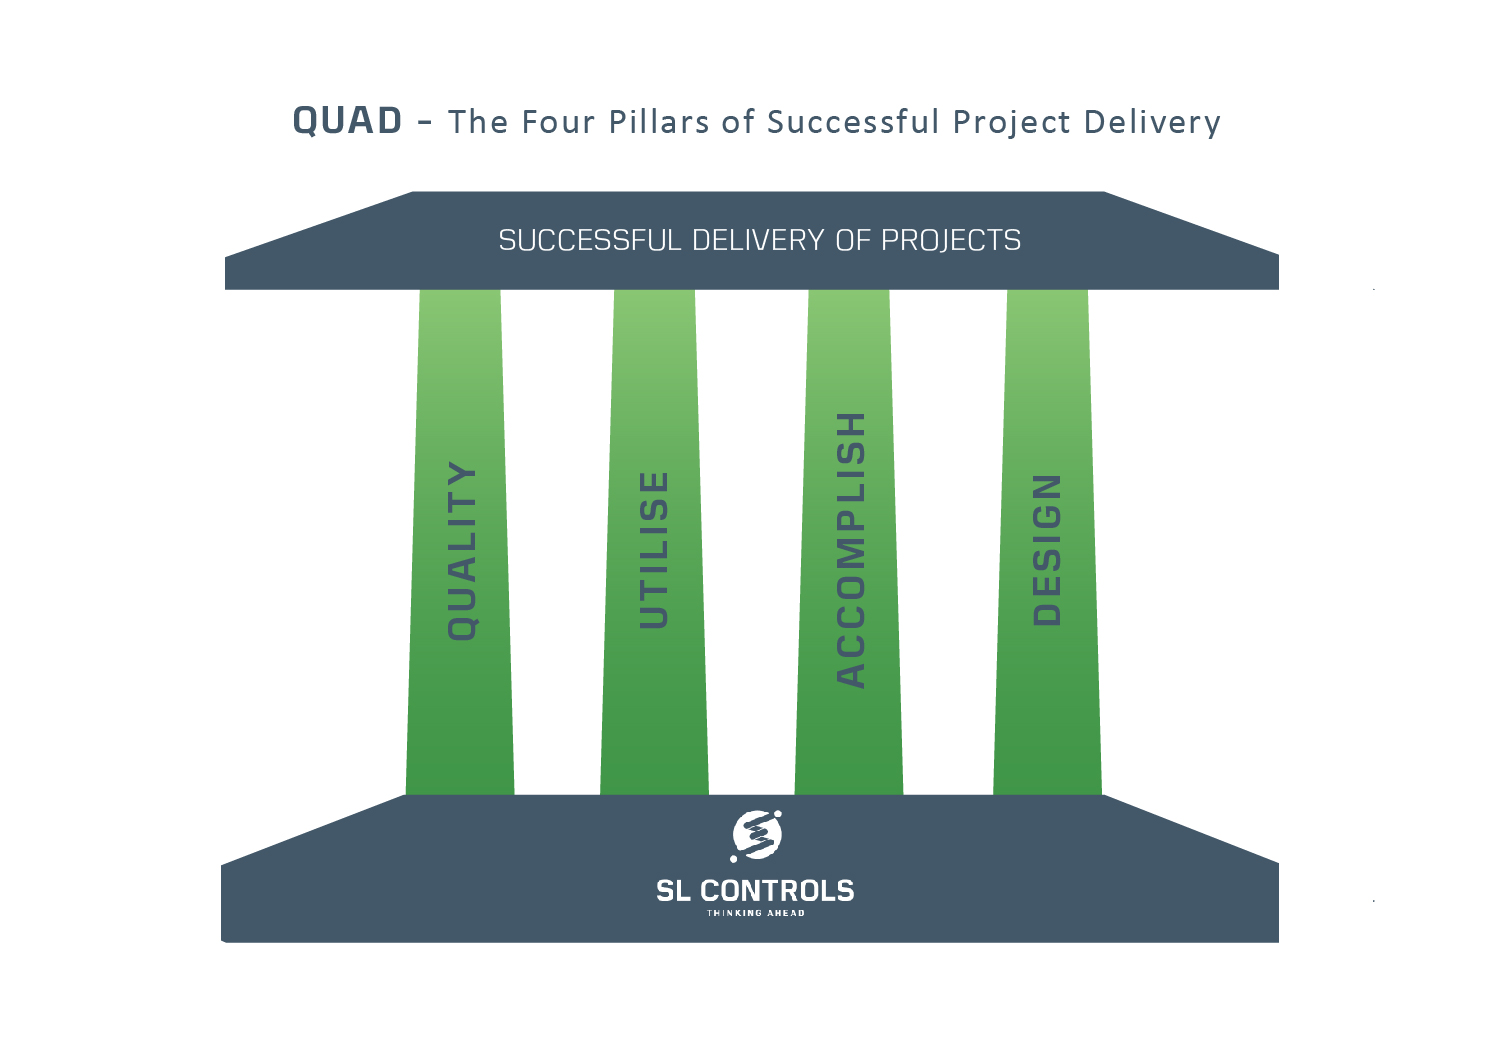 The Four Pillars of Successful Project Delivery - QUAD